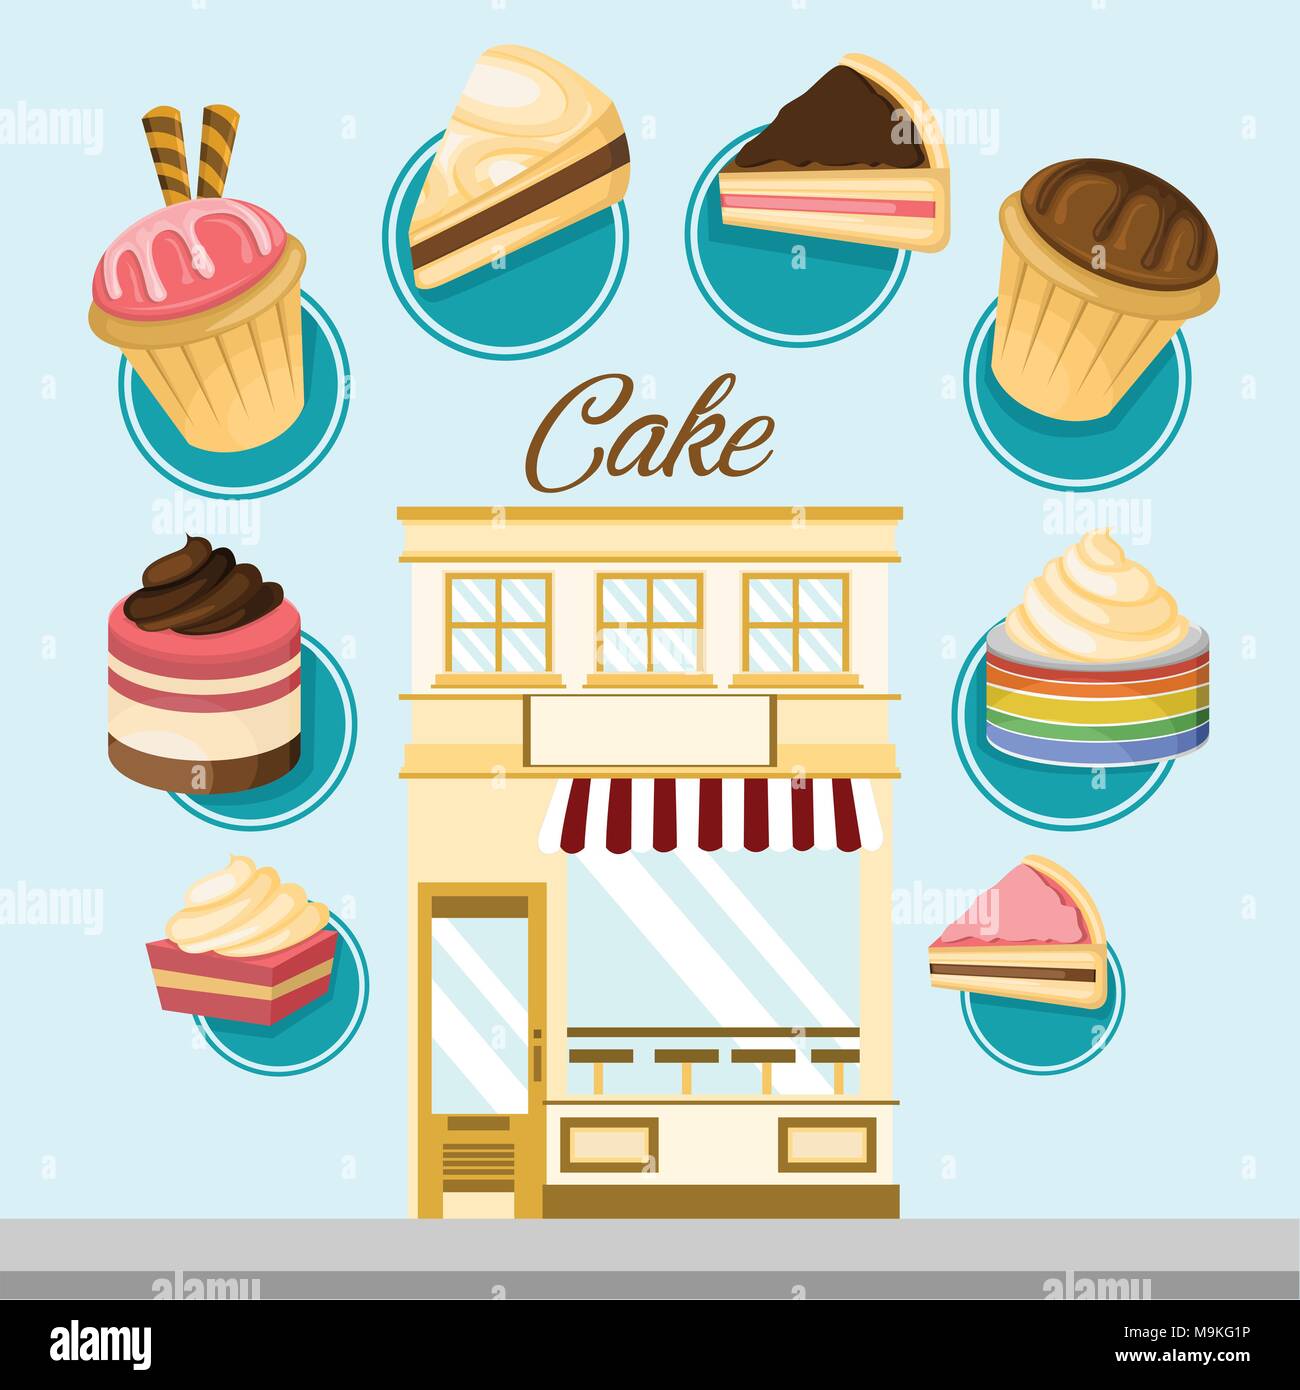 Cake Shop Infographic Vector Illustration Design Graphic Style Stock Vector  Image & Art - Alamy